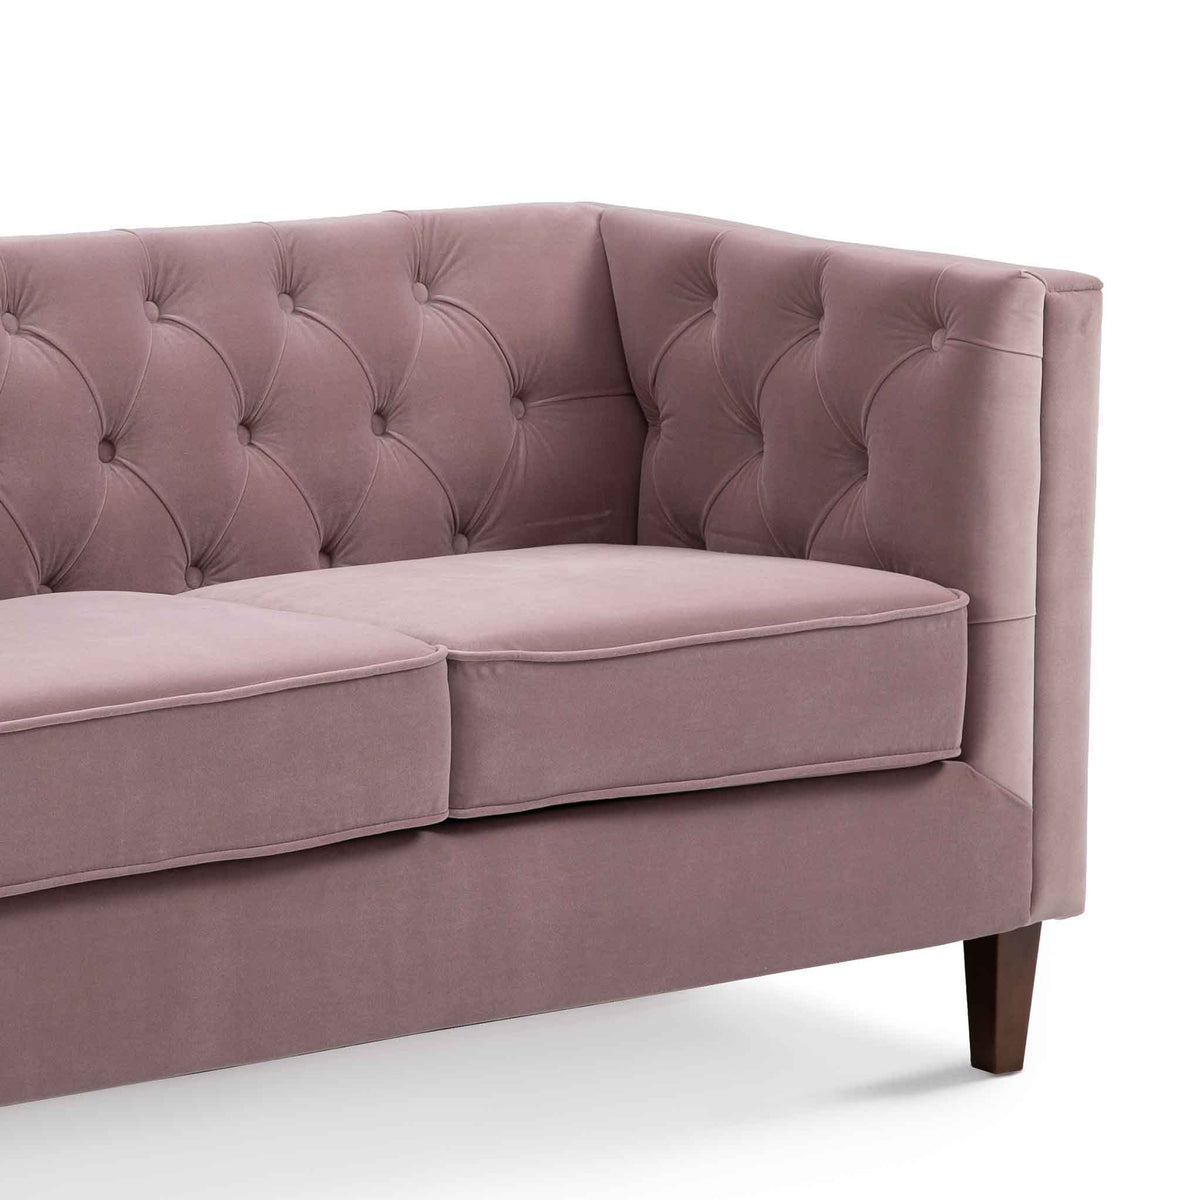 Eliza Heather 3 Seater Chesterfield Sofa - Close up of arm rest and cushion